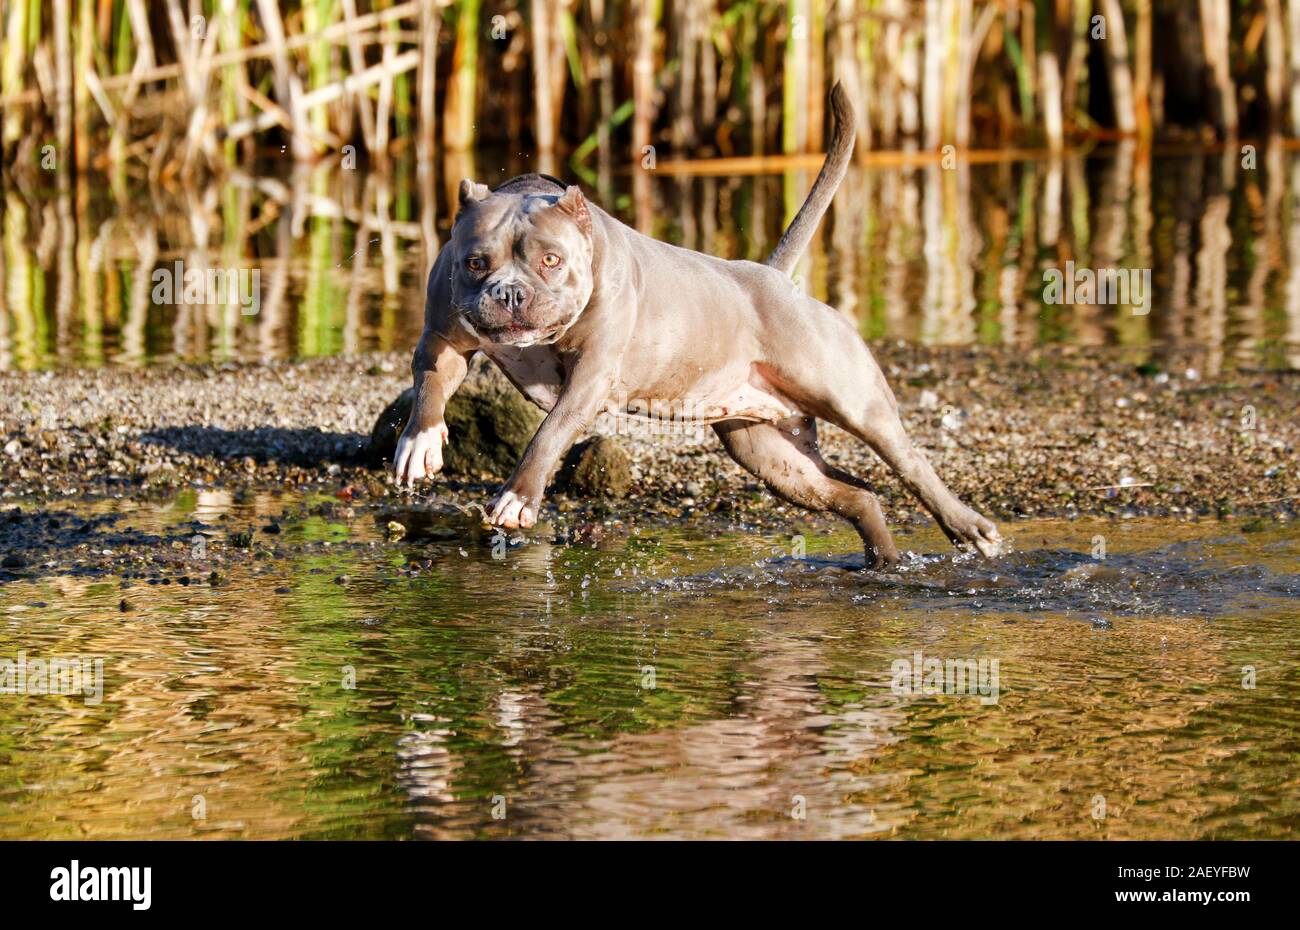 Gray pitbull jumping in the water Stock Photo